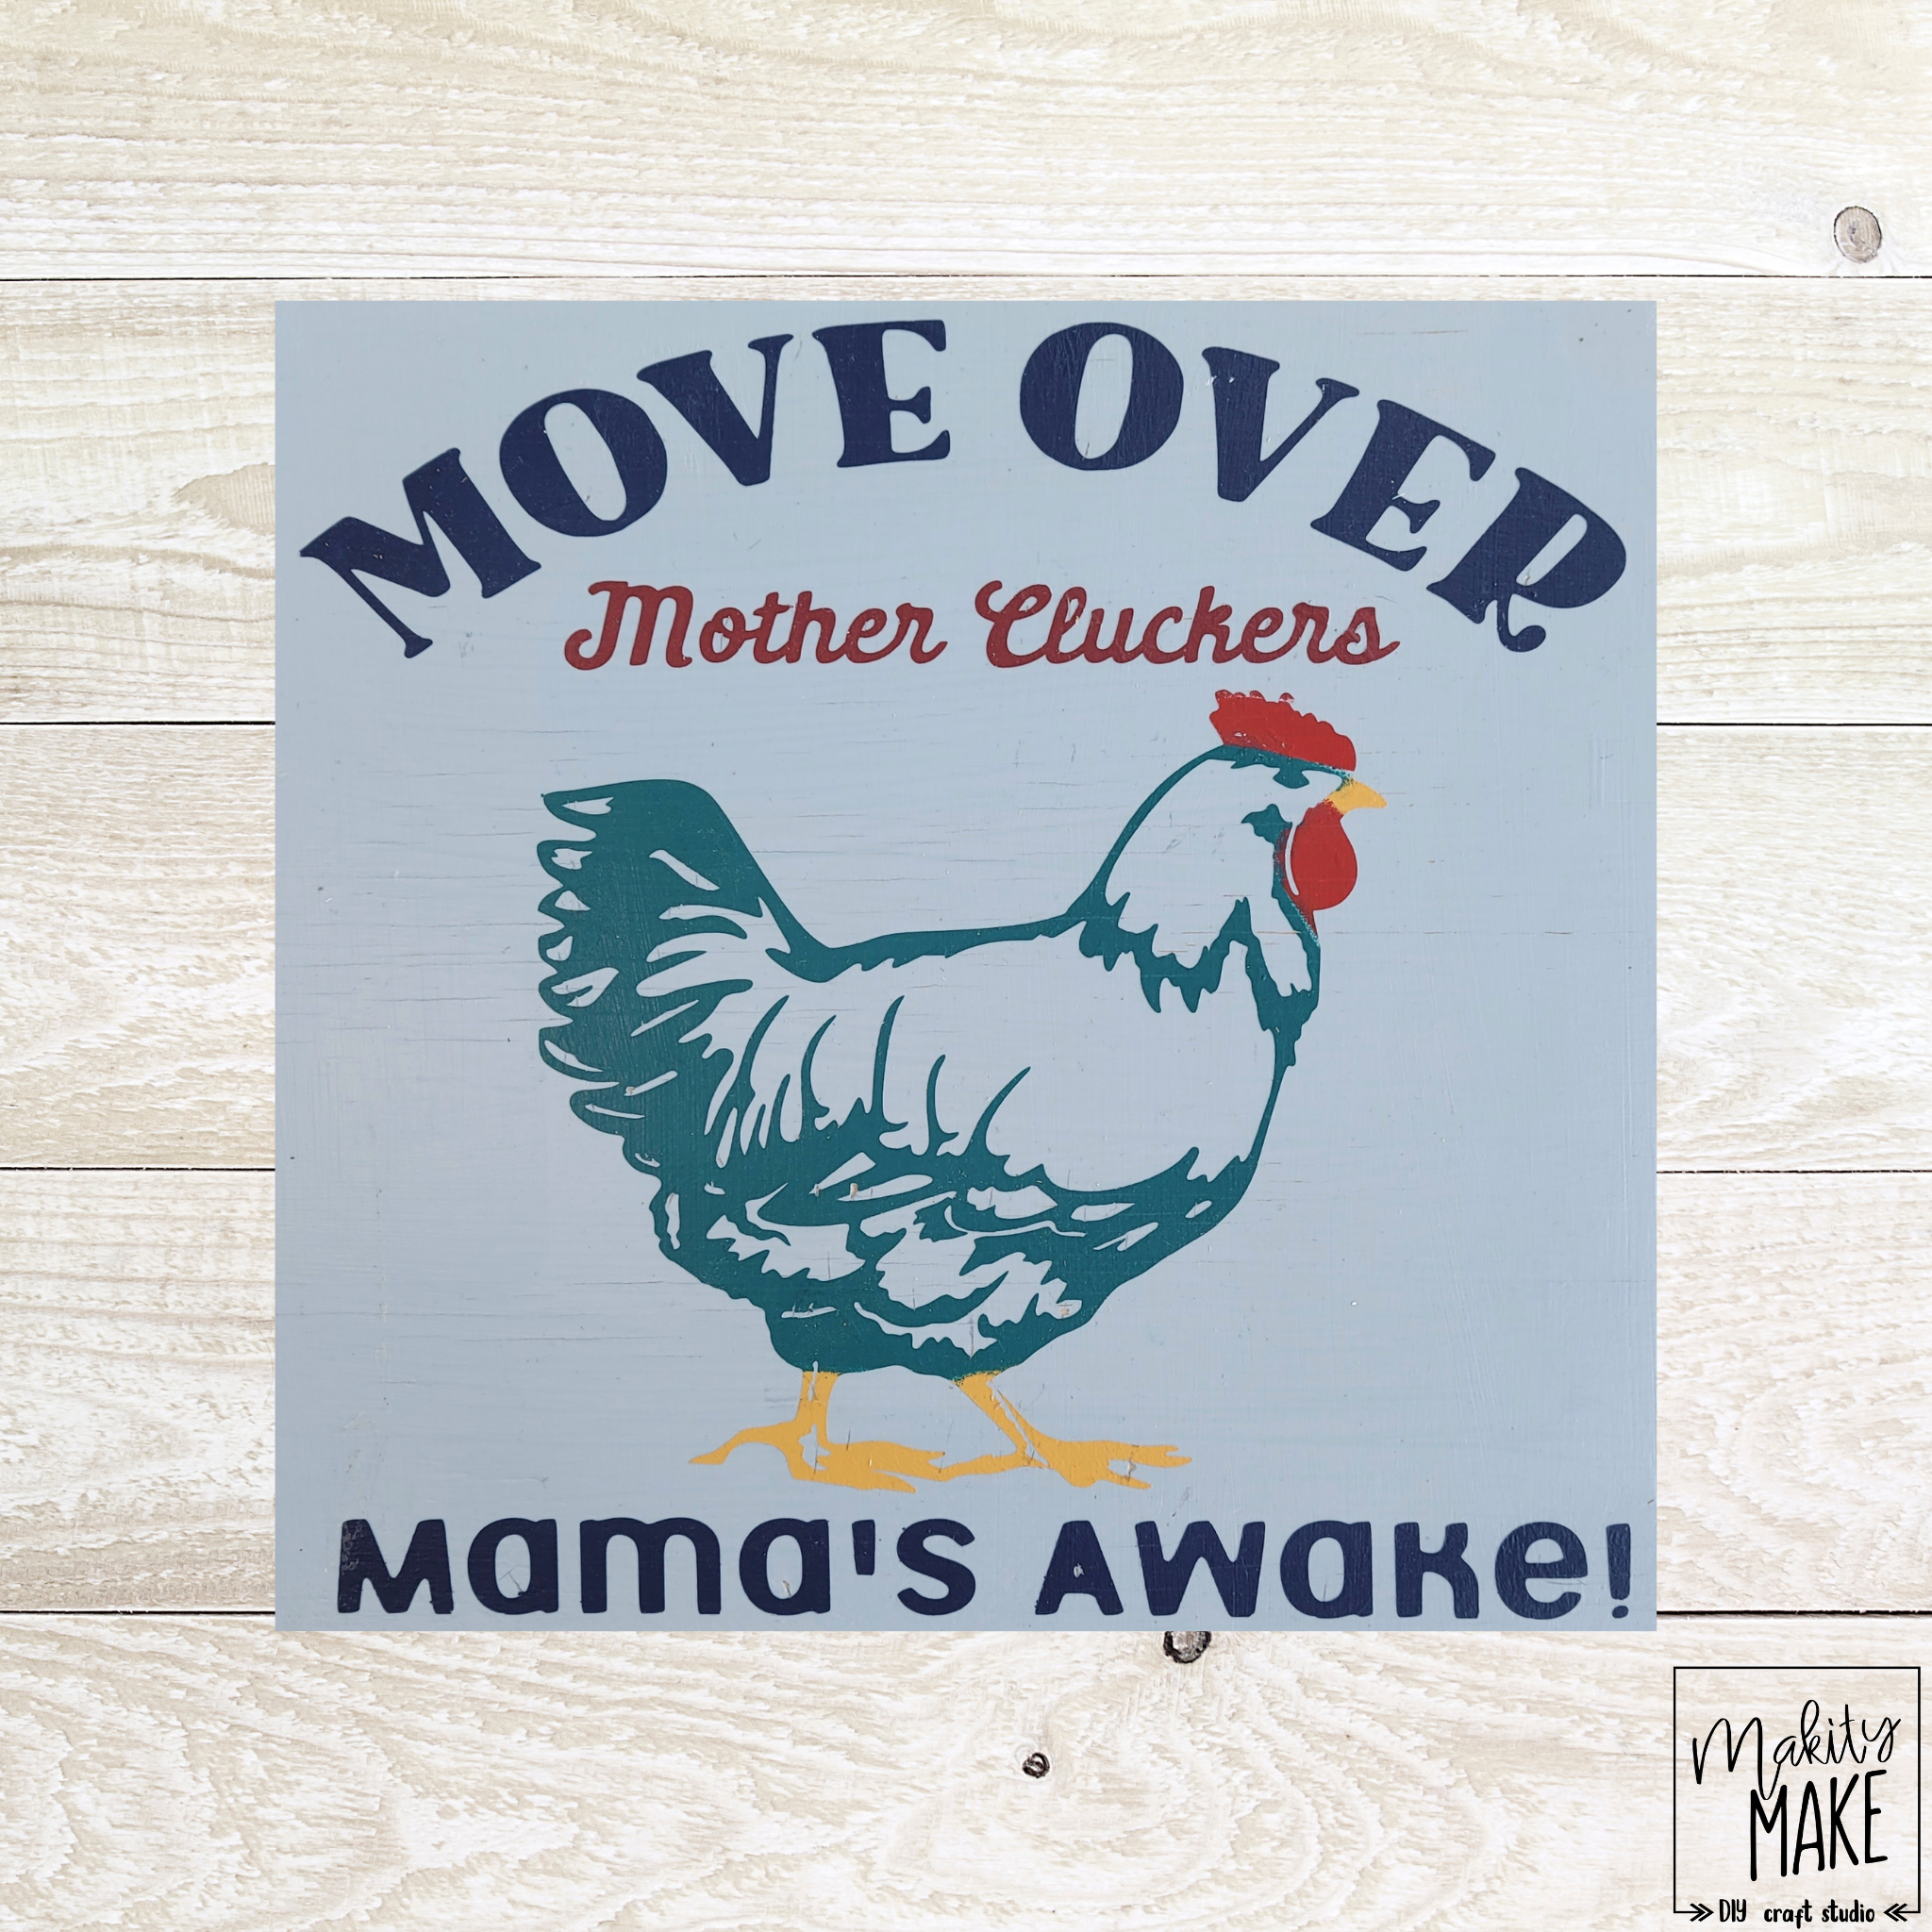 Move over Mother Cluckers